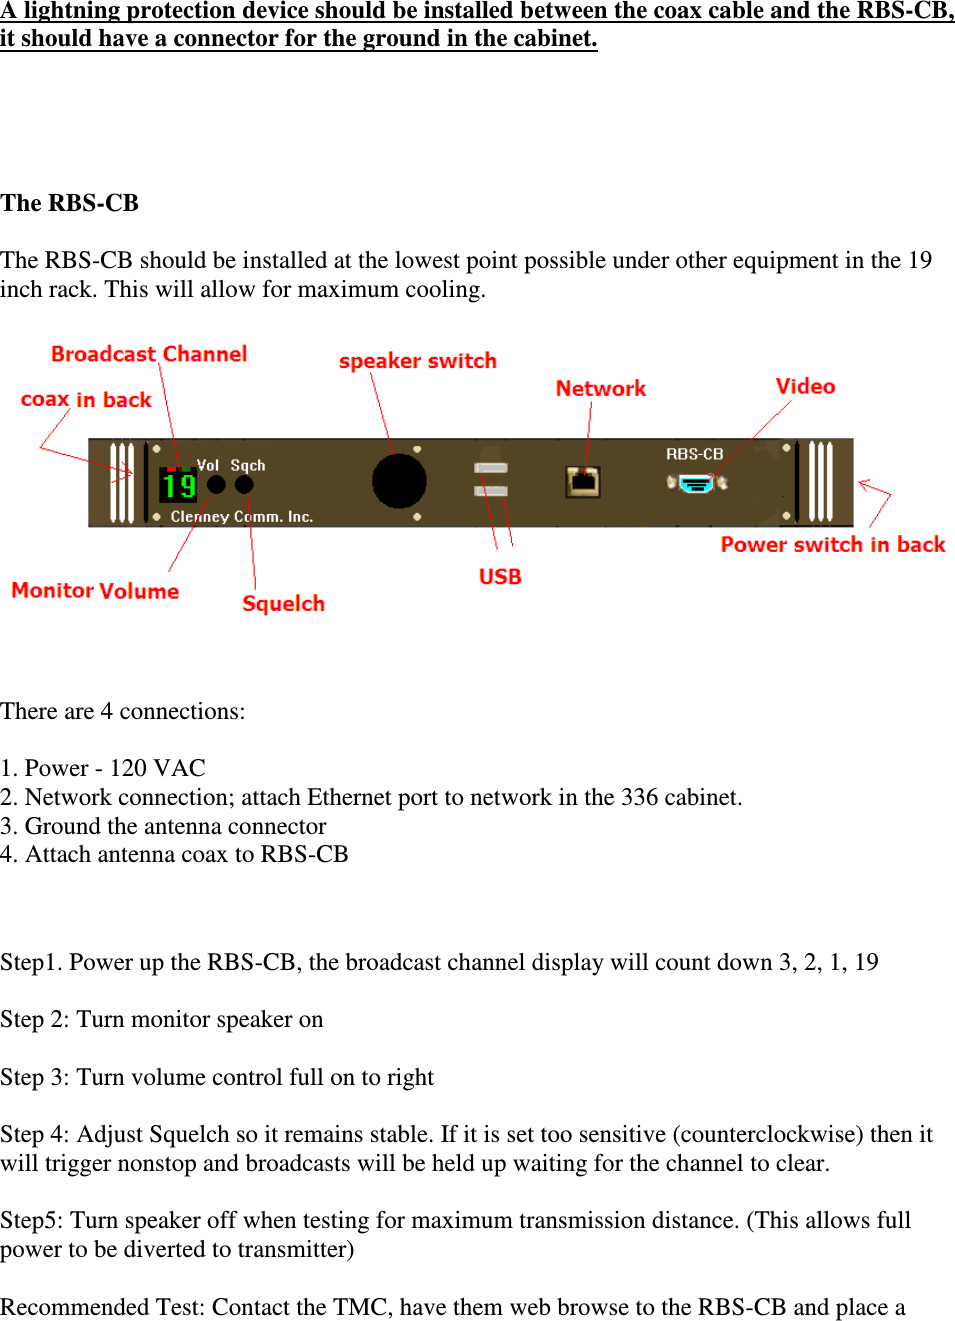 A lightning protection device should be installed between the coax cable and the RBS-CB, it should have a connector for the ground in the cabinet.     The RBS-CB   The RBS-CB should be installed at the lowest point possible under other equipment in the 19 inch rack. This will allow for maximum cooling.    There are 4 connections:  1. Power - 120 VAC  2. Network connection; attach Ethernet port to network in the 336 cabinet.  3. Ground the antenna connector  4. Attach antenna coax to RBS-CB    Step1. Power up the RBS-CB, the broadcast channel display will count down 3, 2, 1, 19   Step 2: Turn monitor speaker on   Step 3: Turn volume control full on to right   Step 4: Adjust Squelch so it remains stable. If it is set too sensitive (counterclockwise) then it will trigger nonstop and broadcasts will be held up waiting for the channel to clear.  Step5: Turn speaker off when testing for maximum transmission distance. (This allows full power to be diverted to transmitter)  Recommended Test: Contact the TMC, have them web browse to the RBS-CB and place a 